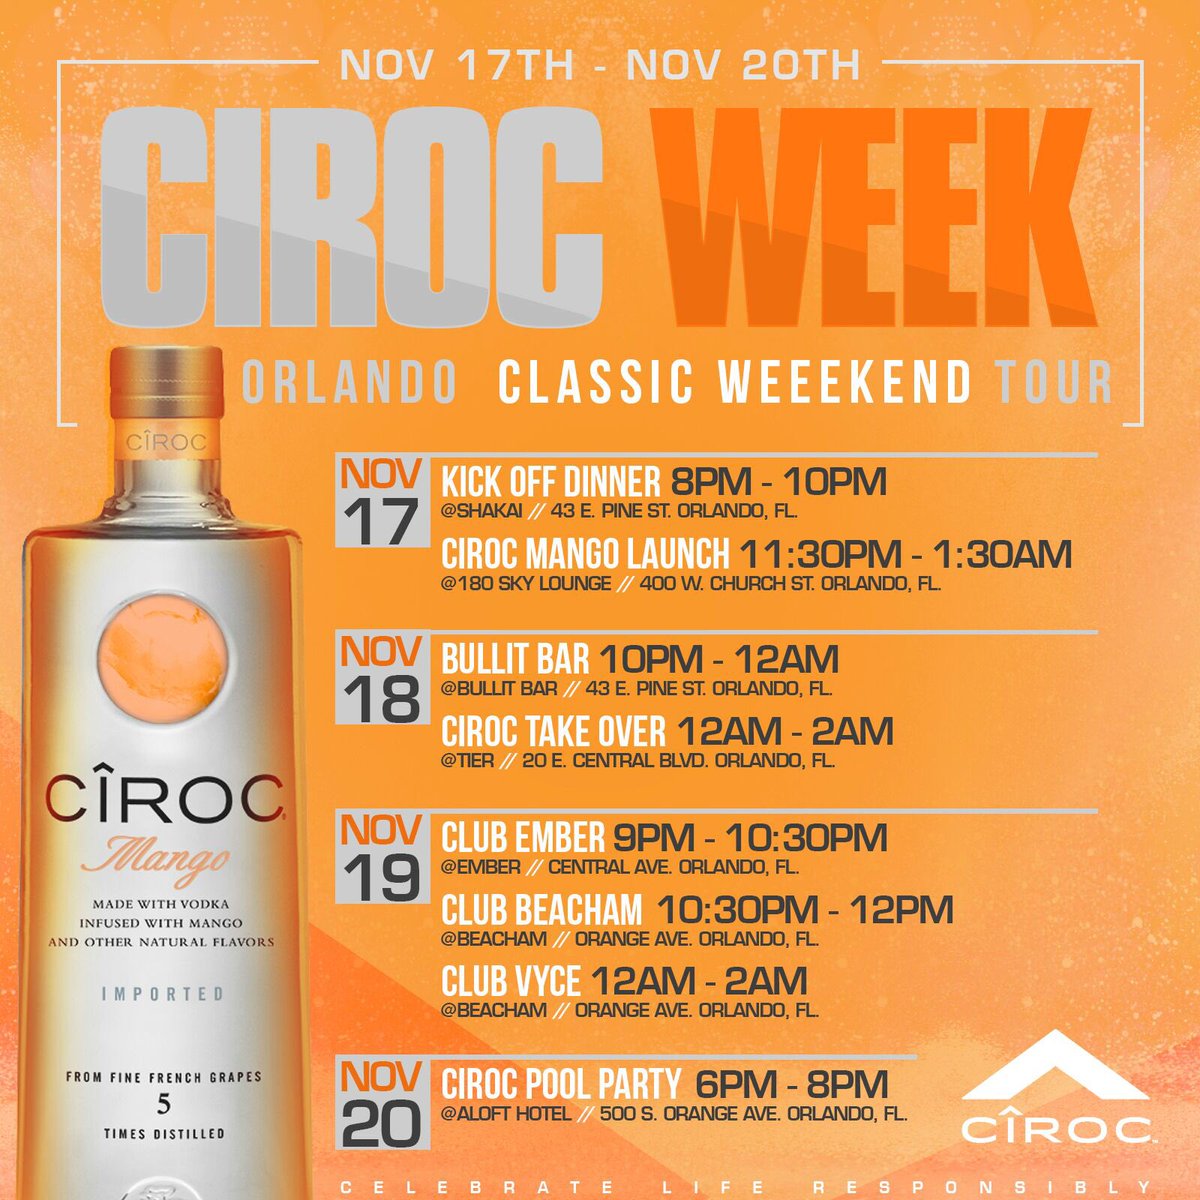 Orlando! Ciroc Week Is Back! Come Celebrate The #CirocLife at These Locations. @cirocmiami For More Info! #LetsGetIt https://t.co/YR09T8QSaw